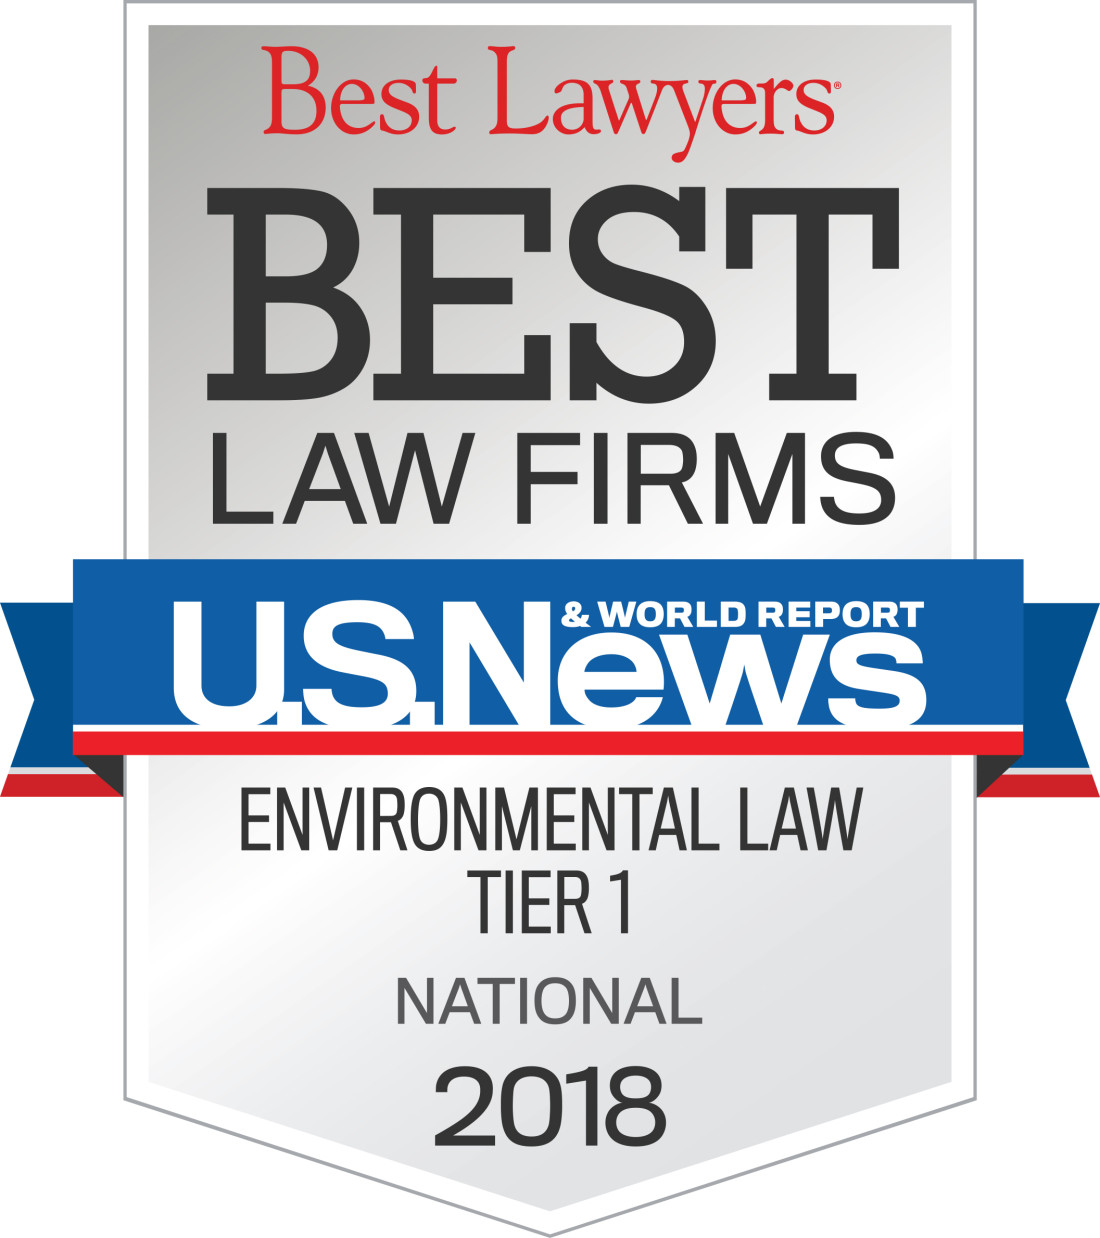 2018 Best Law Firm - Environmental Law Tier I National